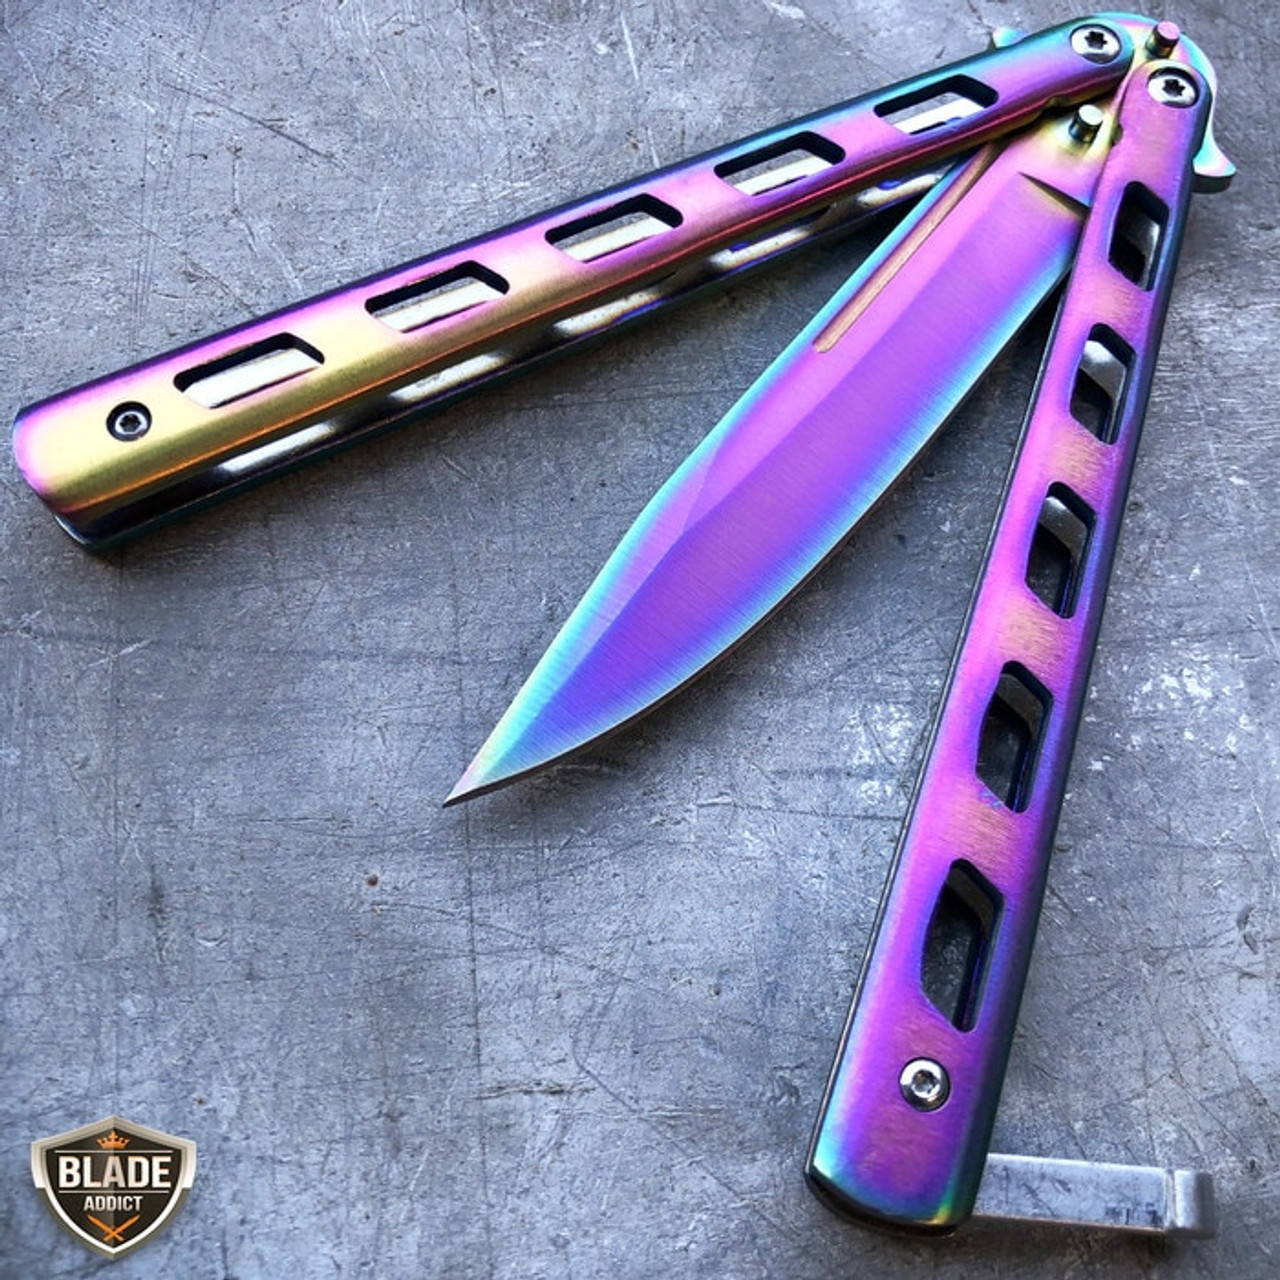 Trading rainbow knife and chromatic set : r/MM2Trade